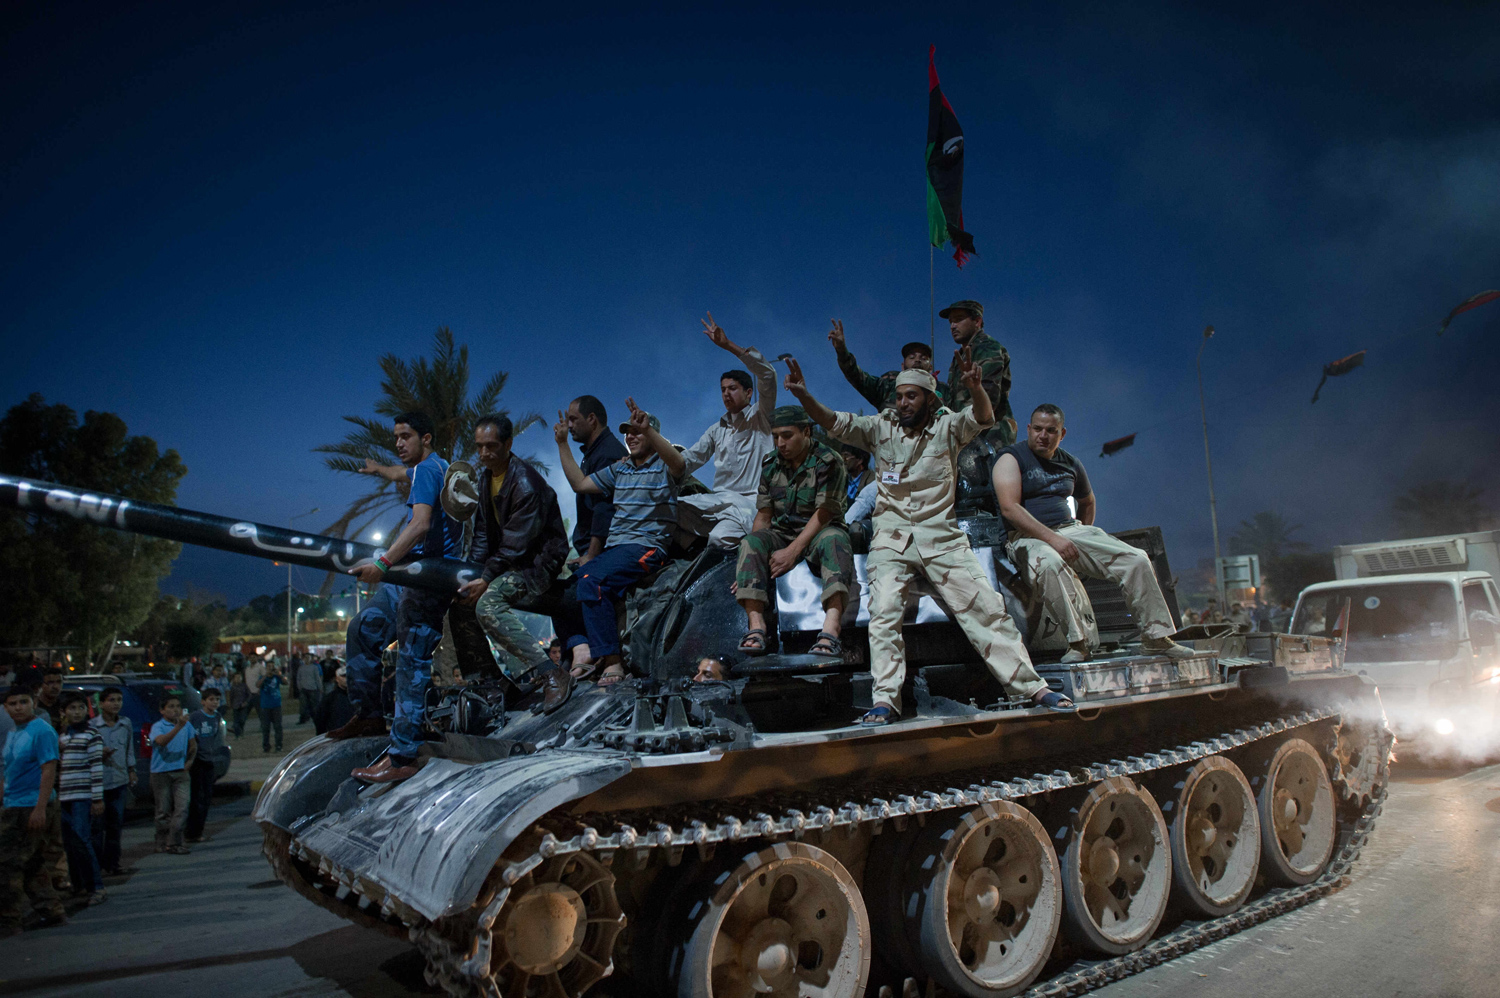 Oct. 23, 2011. Libyans celebrate following the official declaration of liberation of the entire country, in the city of Misrata, Libya.